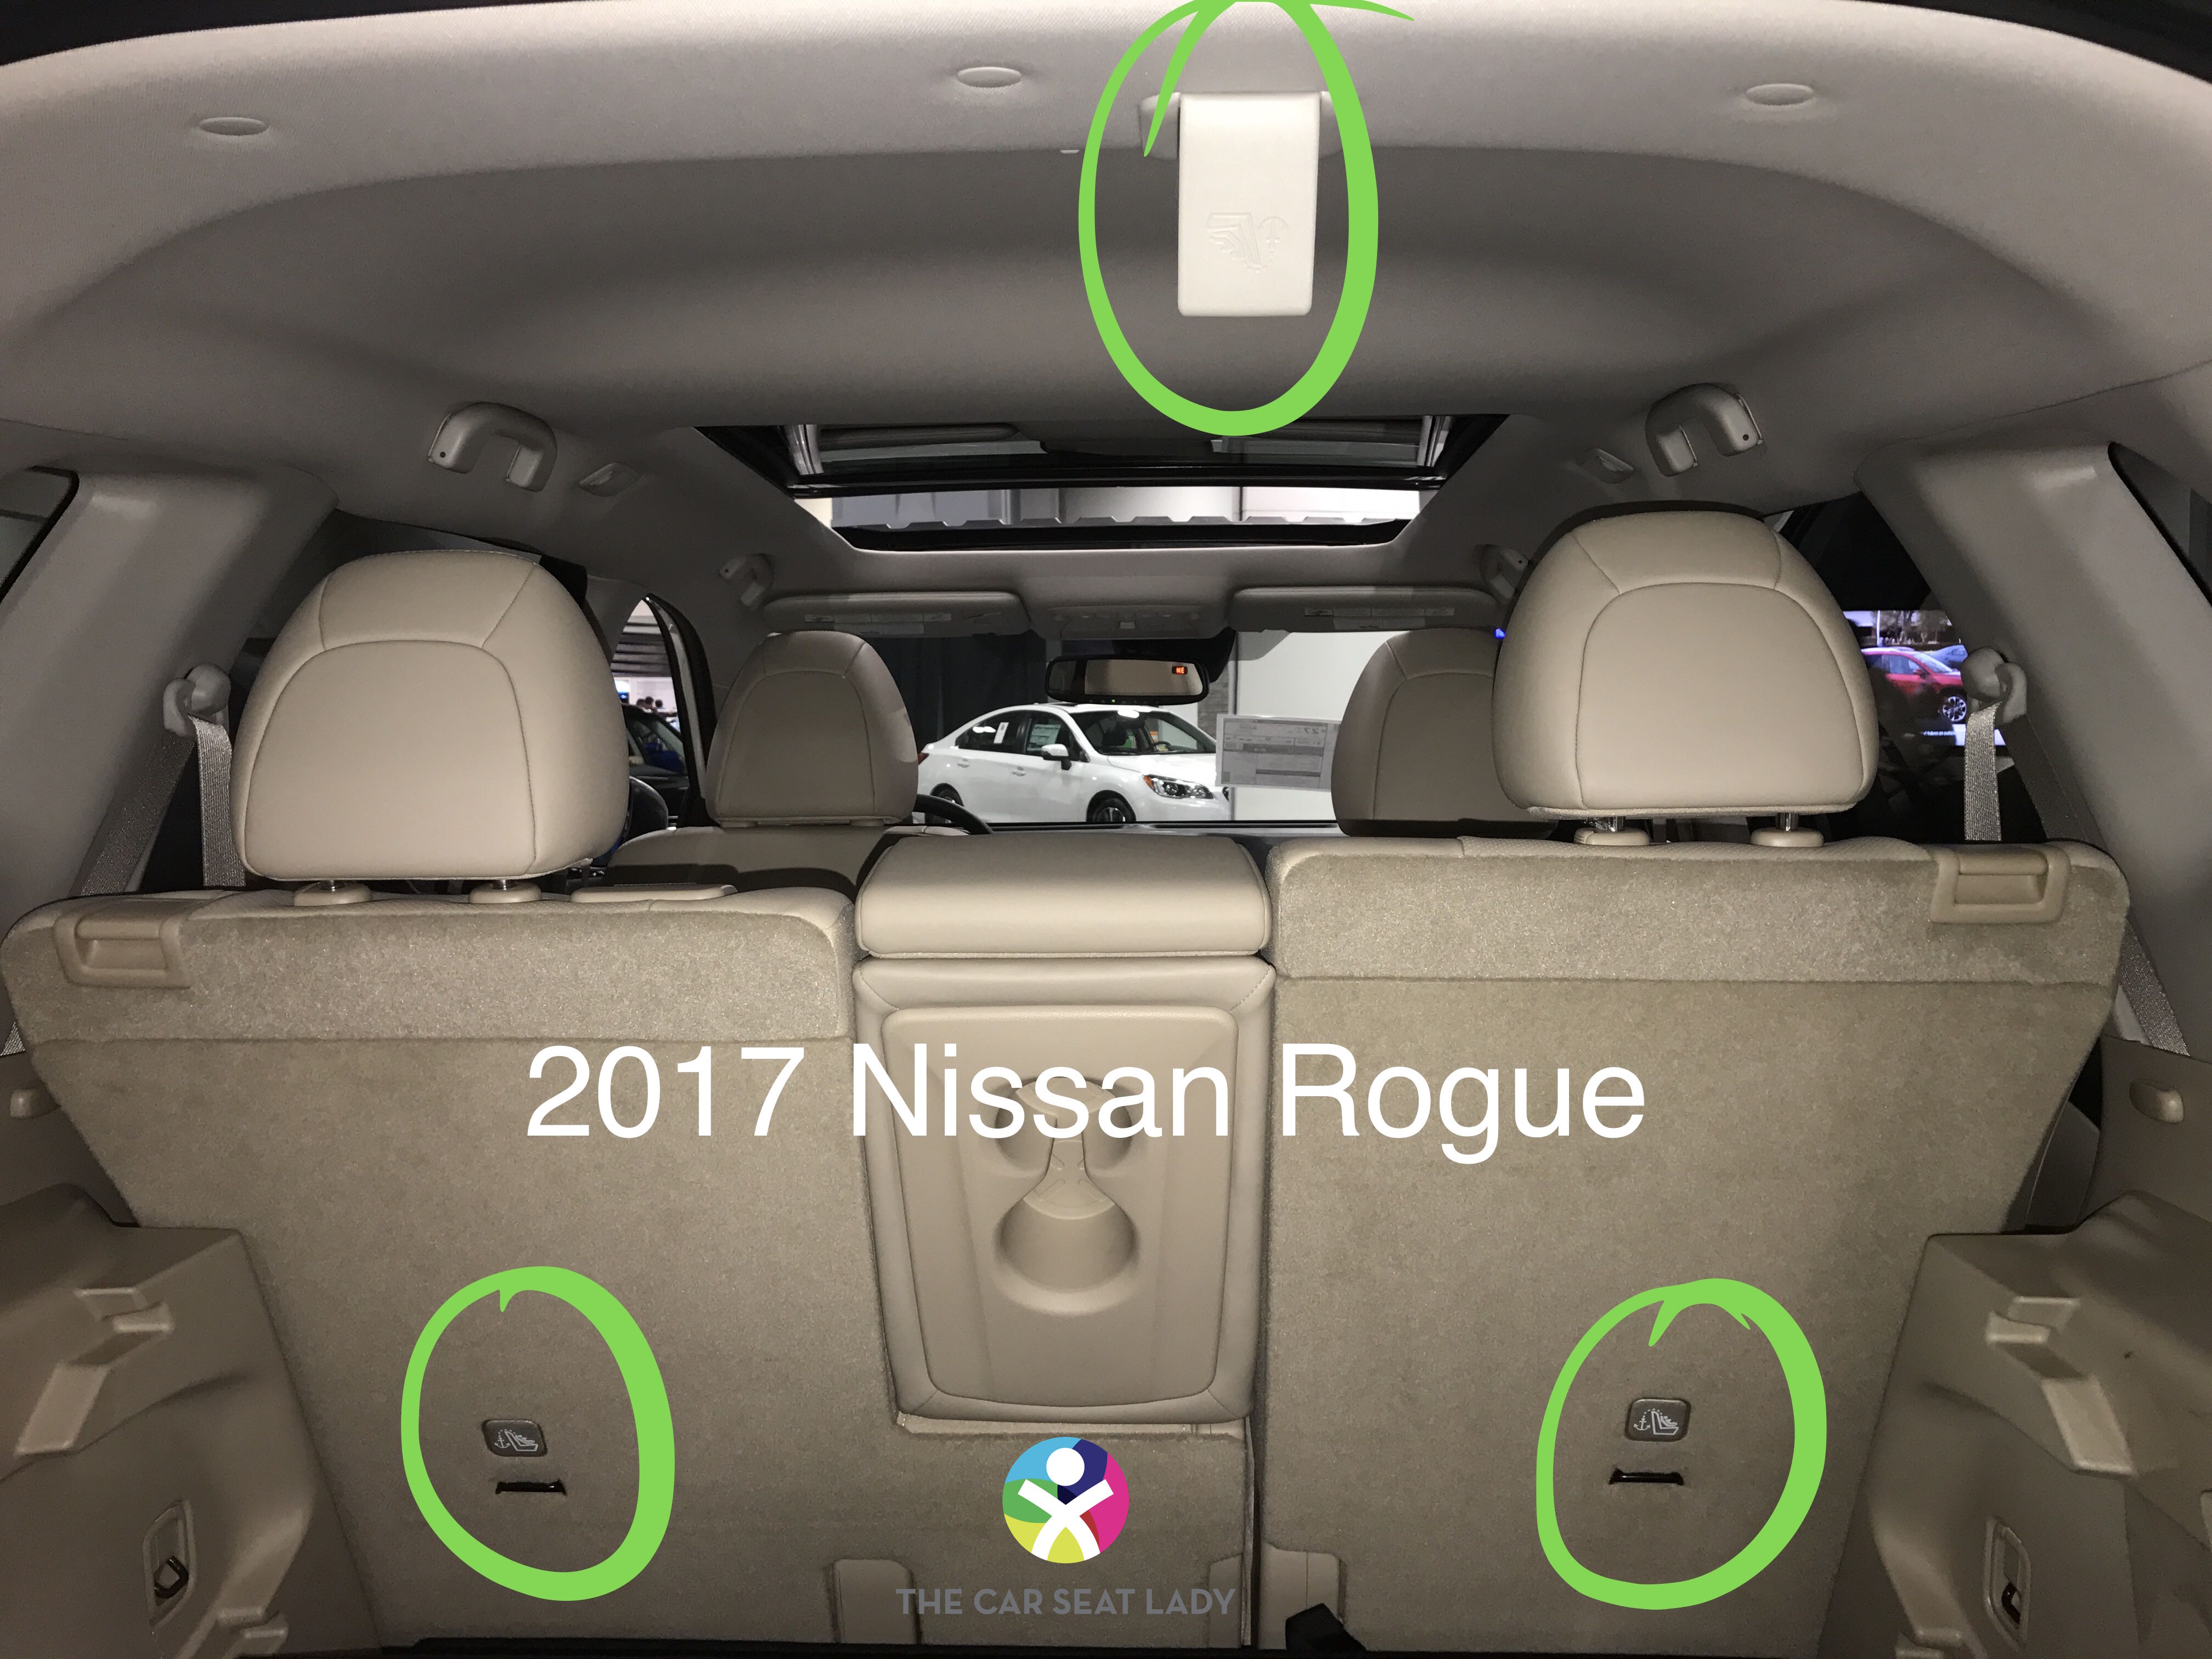 The Car Seat Ladynissan Rogue